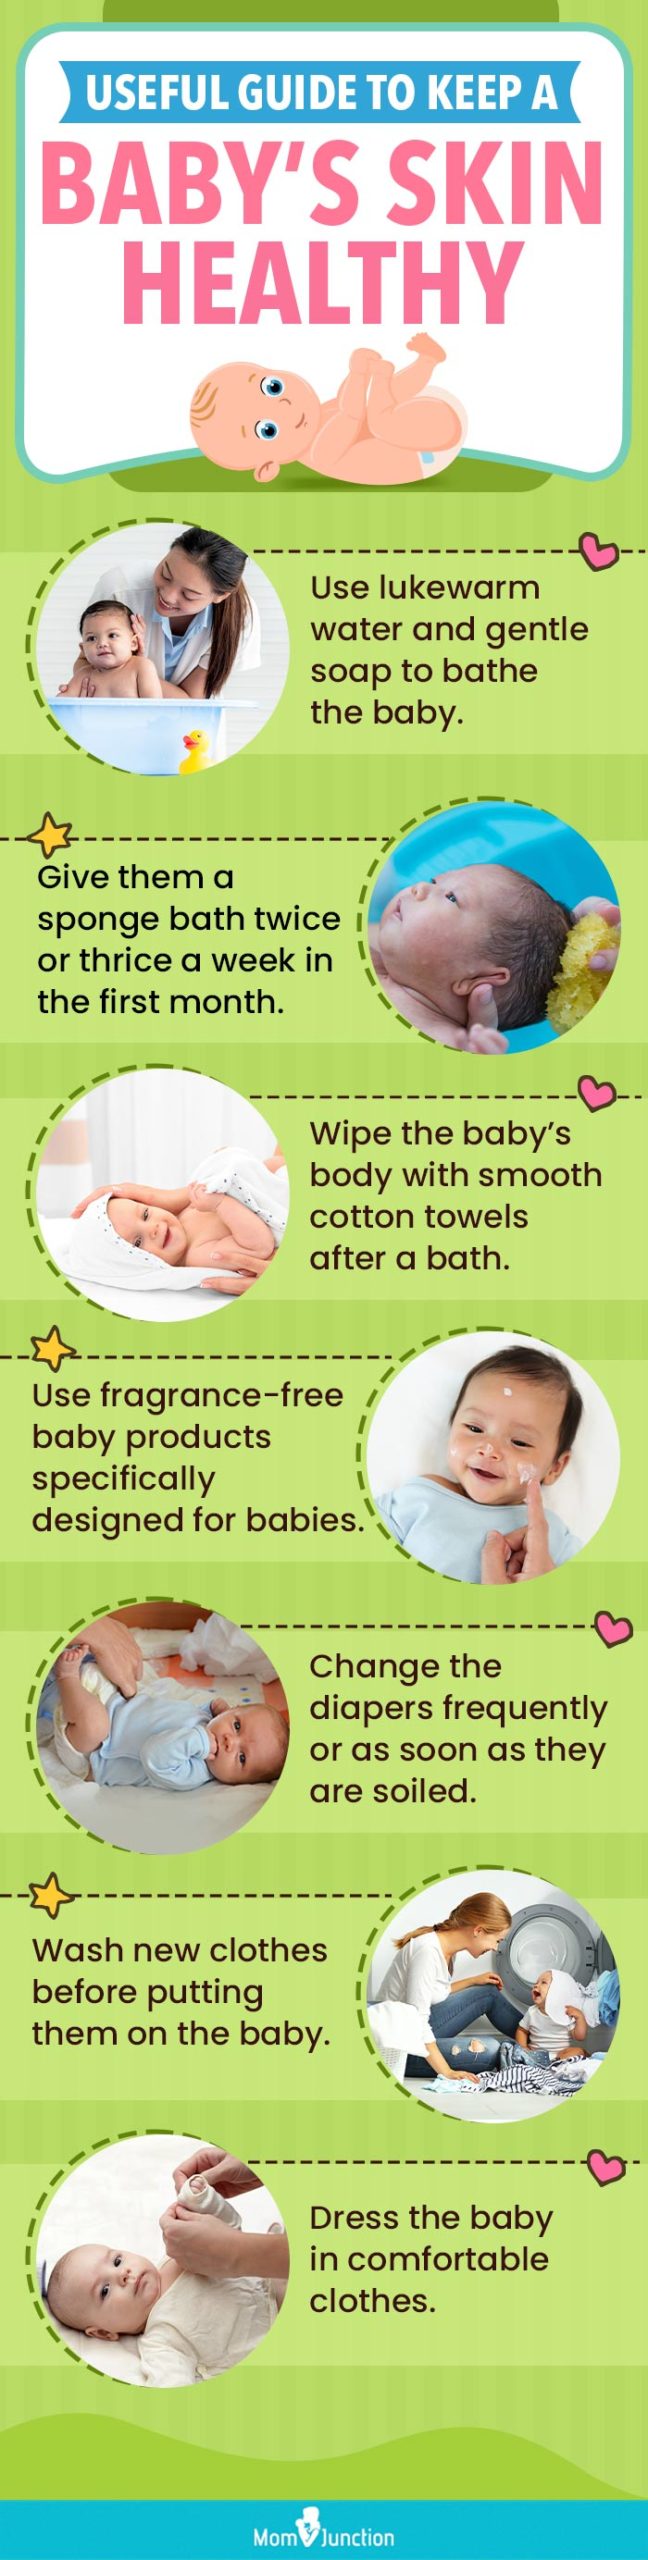 useful guide to keep a baby skin healthy (infographic)